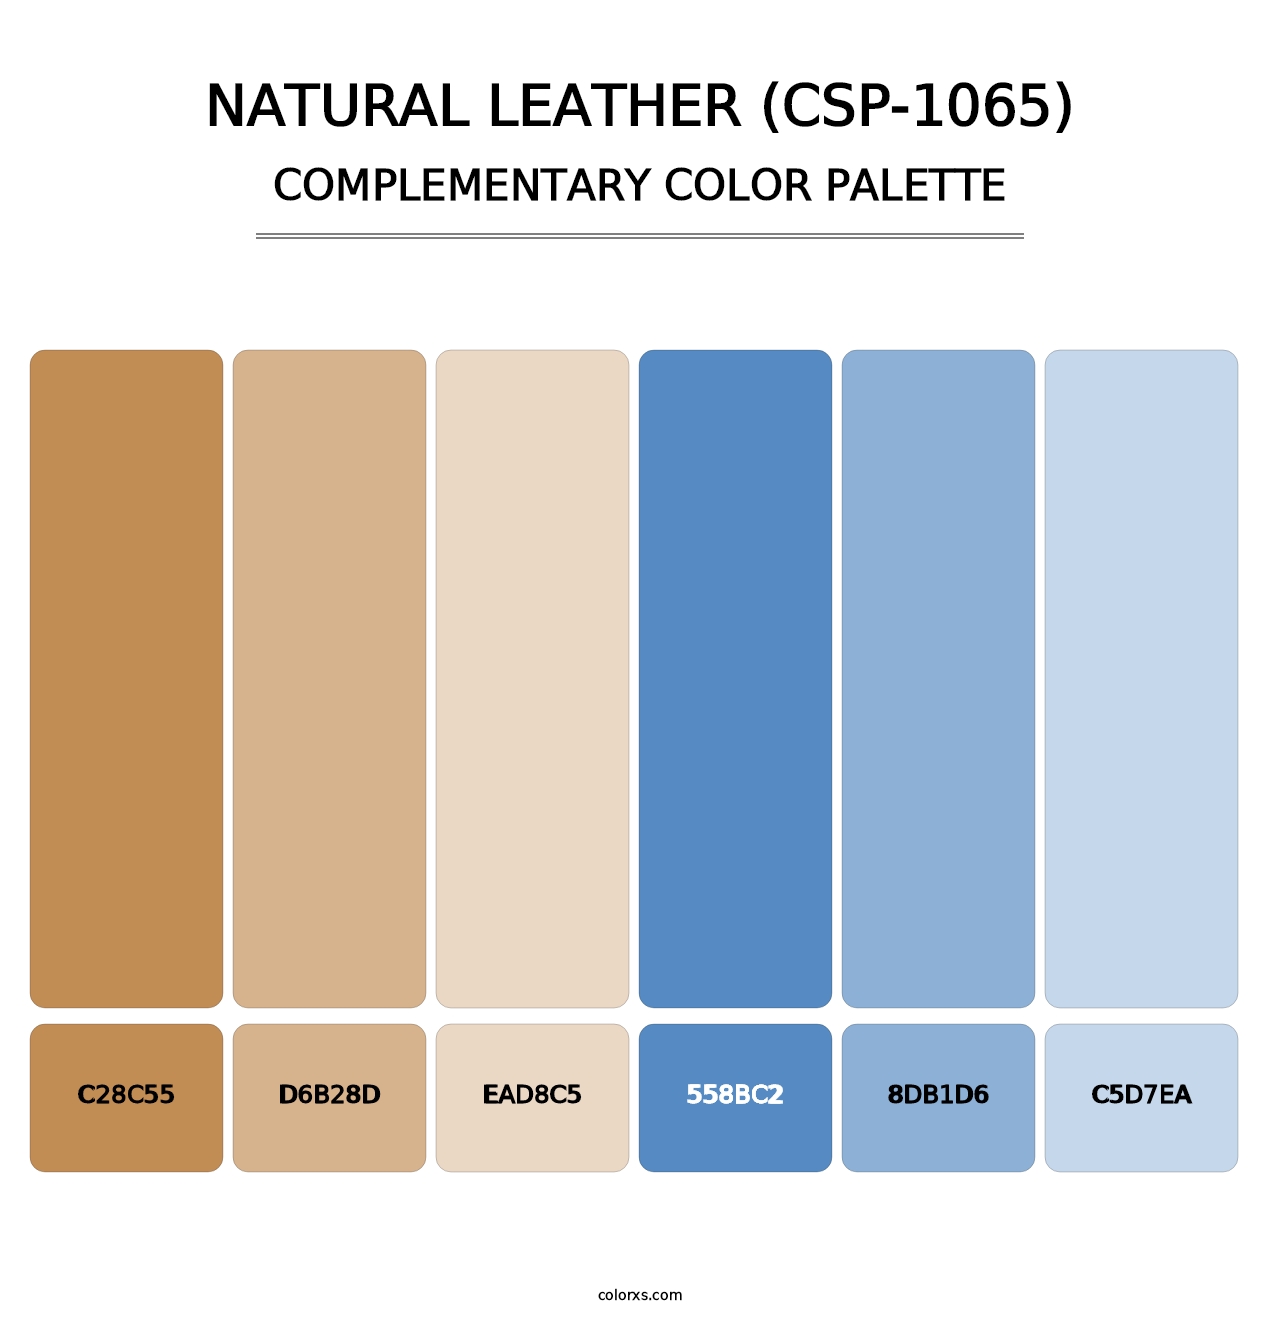 Natural Leather (CSP-1065) - Complementary Color Palette